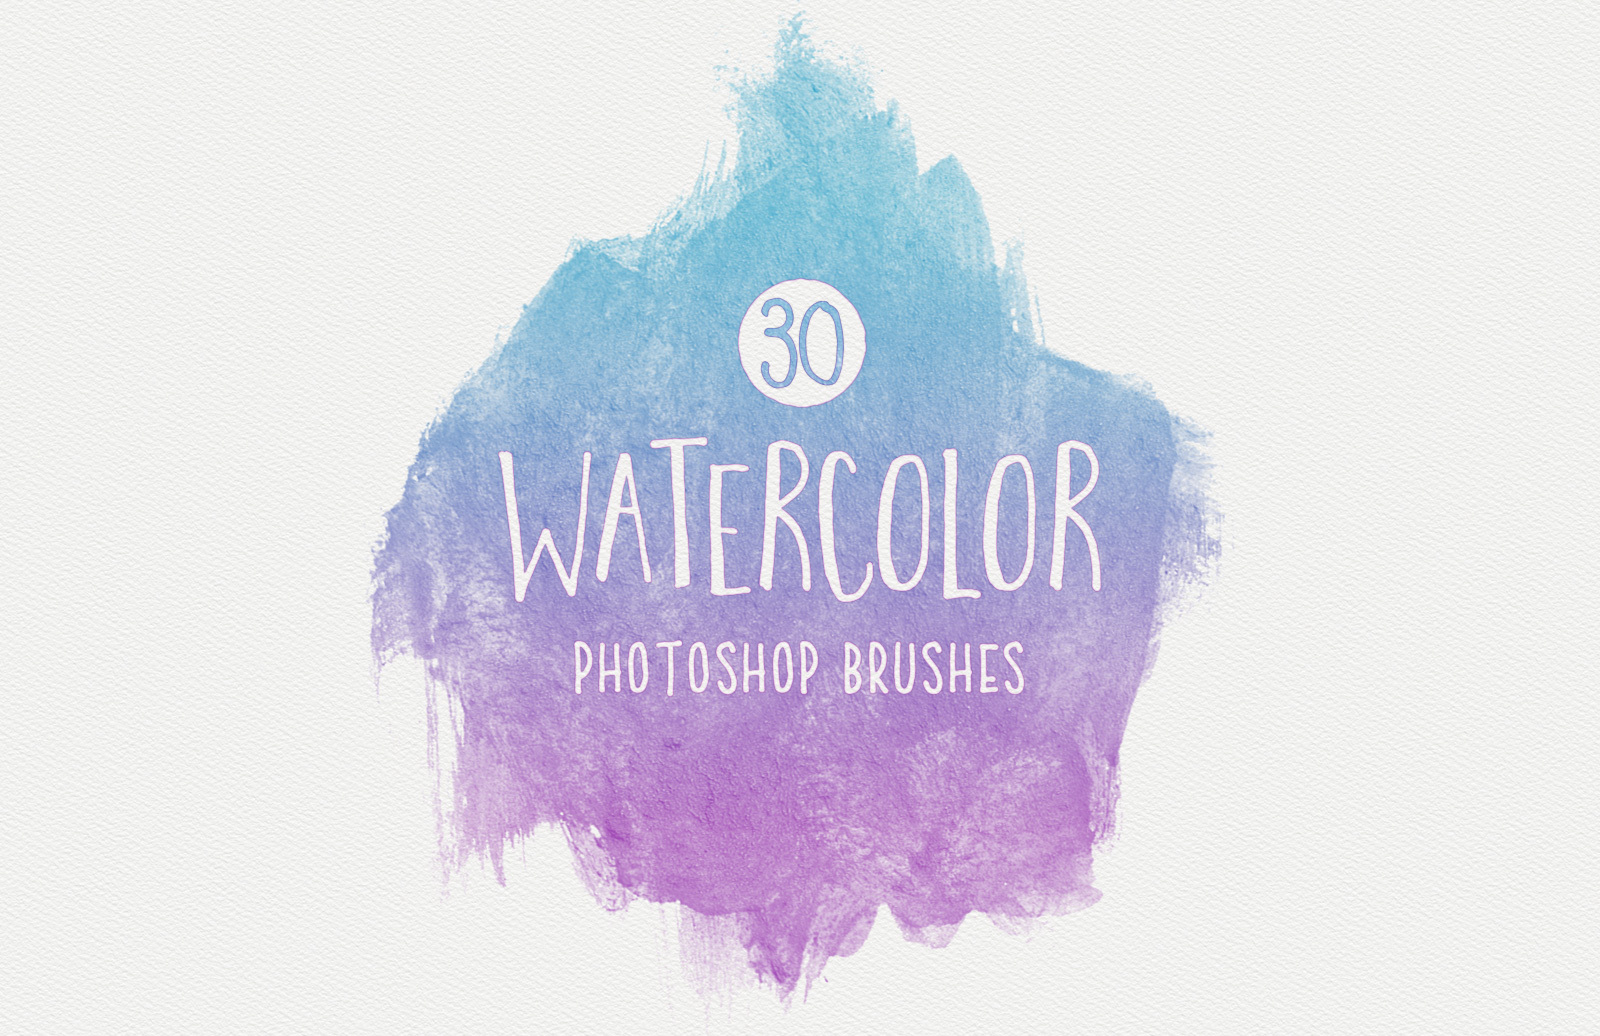  Watercolor  Brushes  for Photoshop   Medialoot